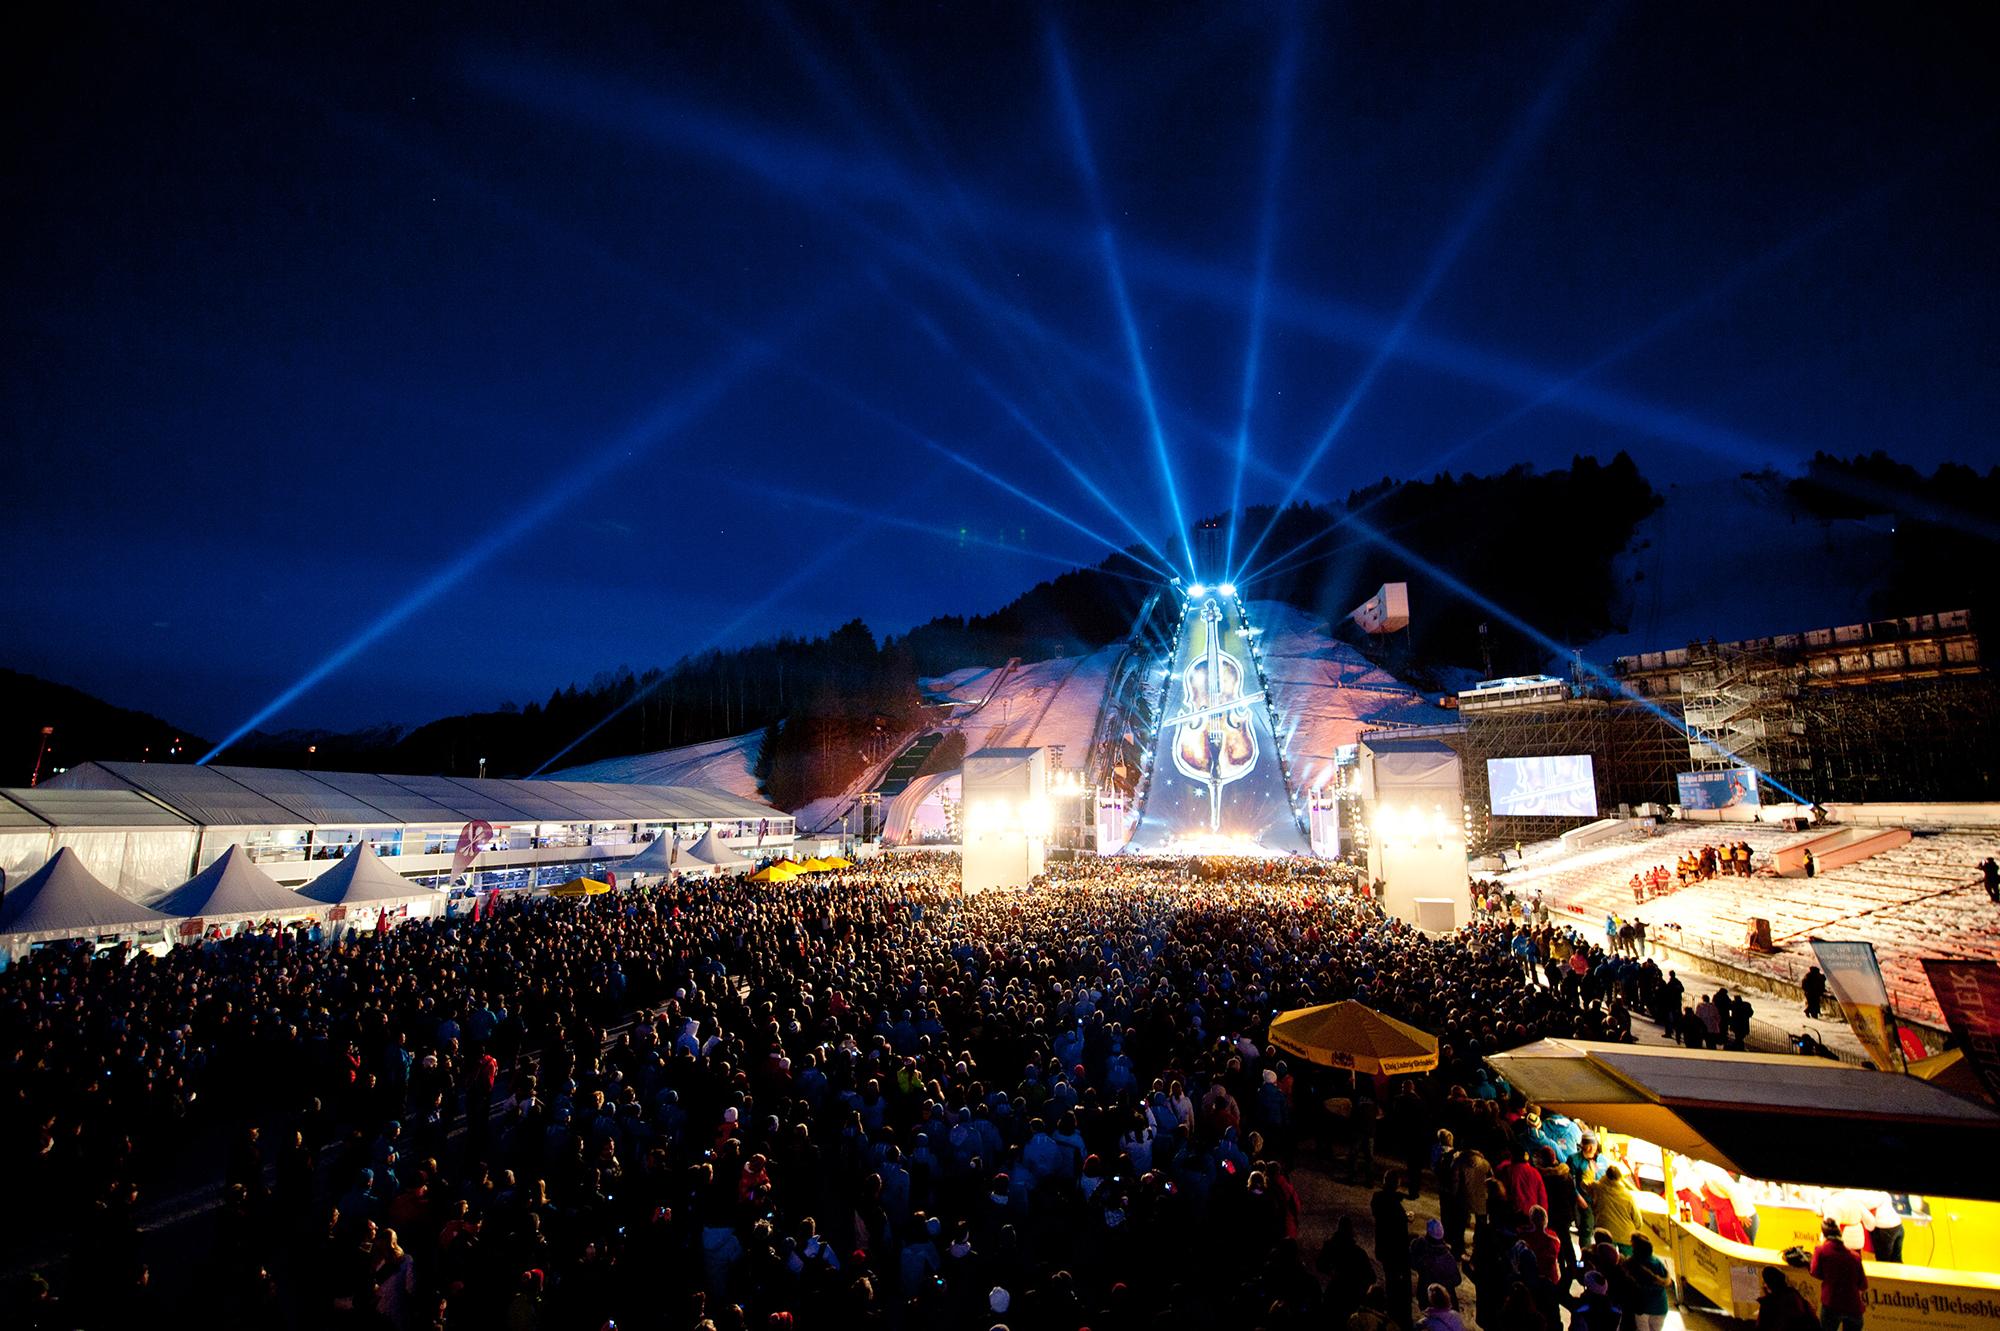 A violin is projection mapped onto the ski slope as a sea of people looks on.